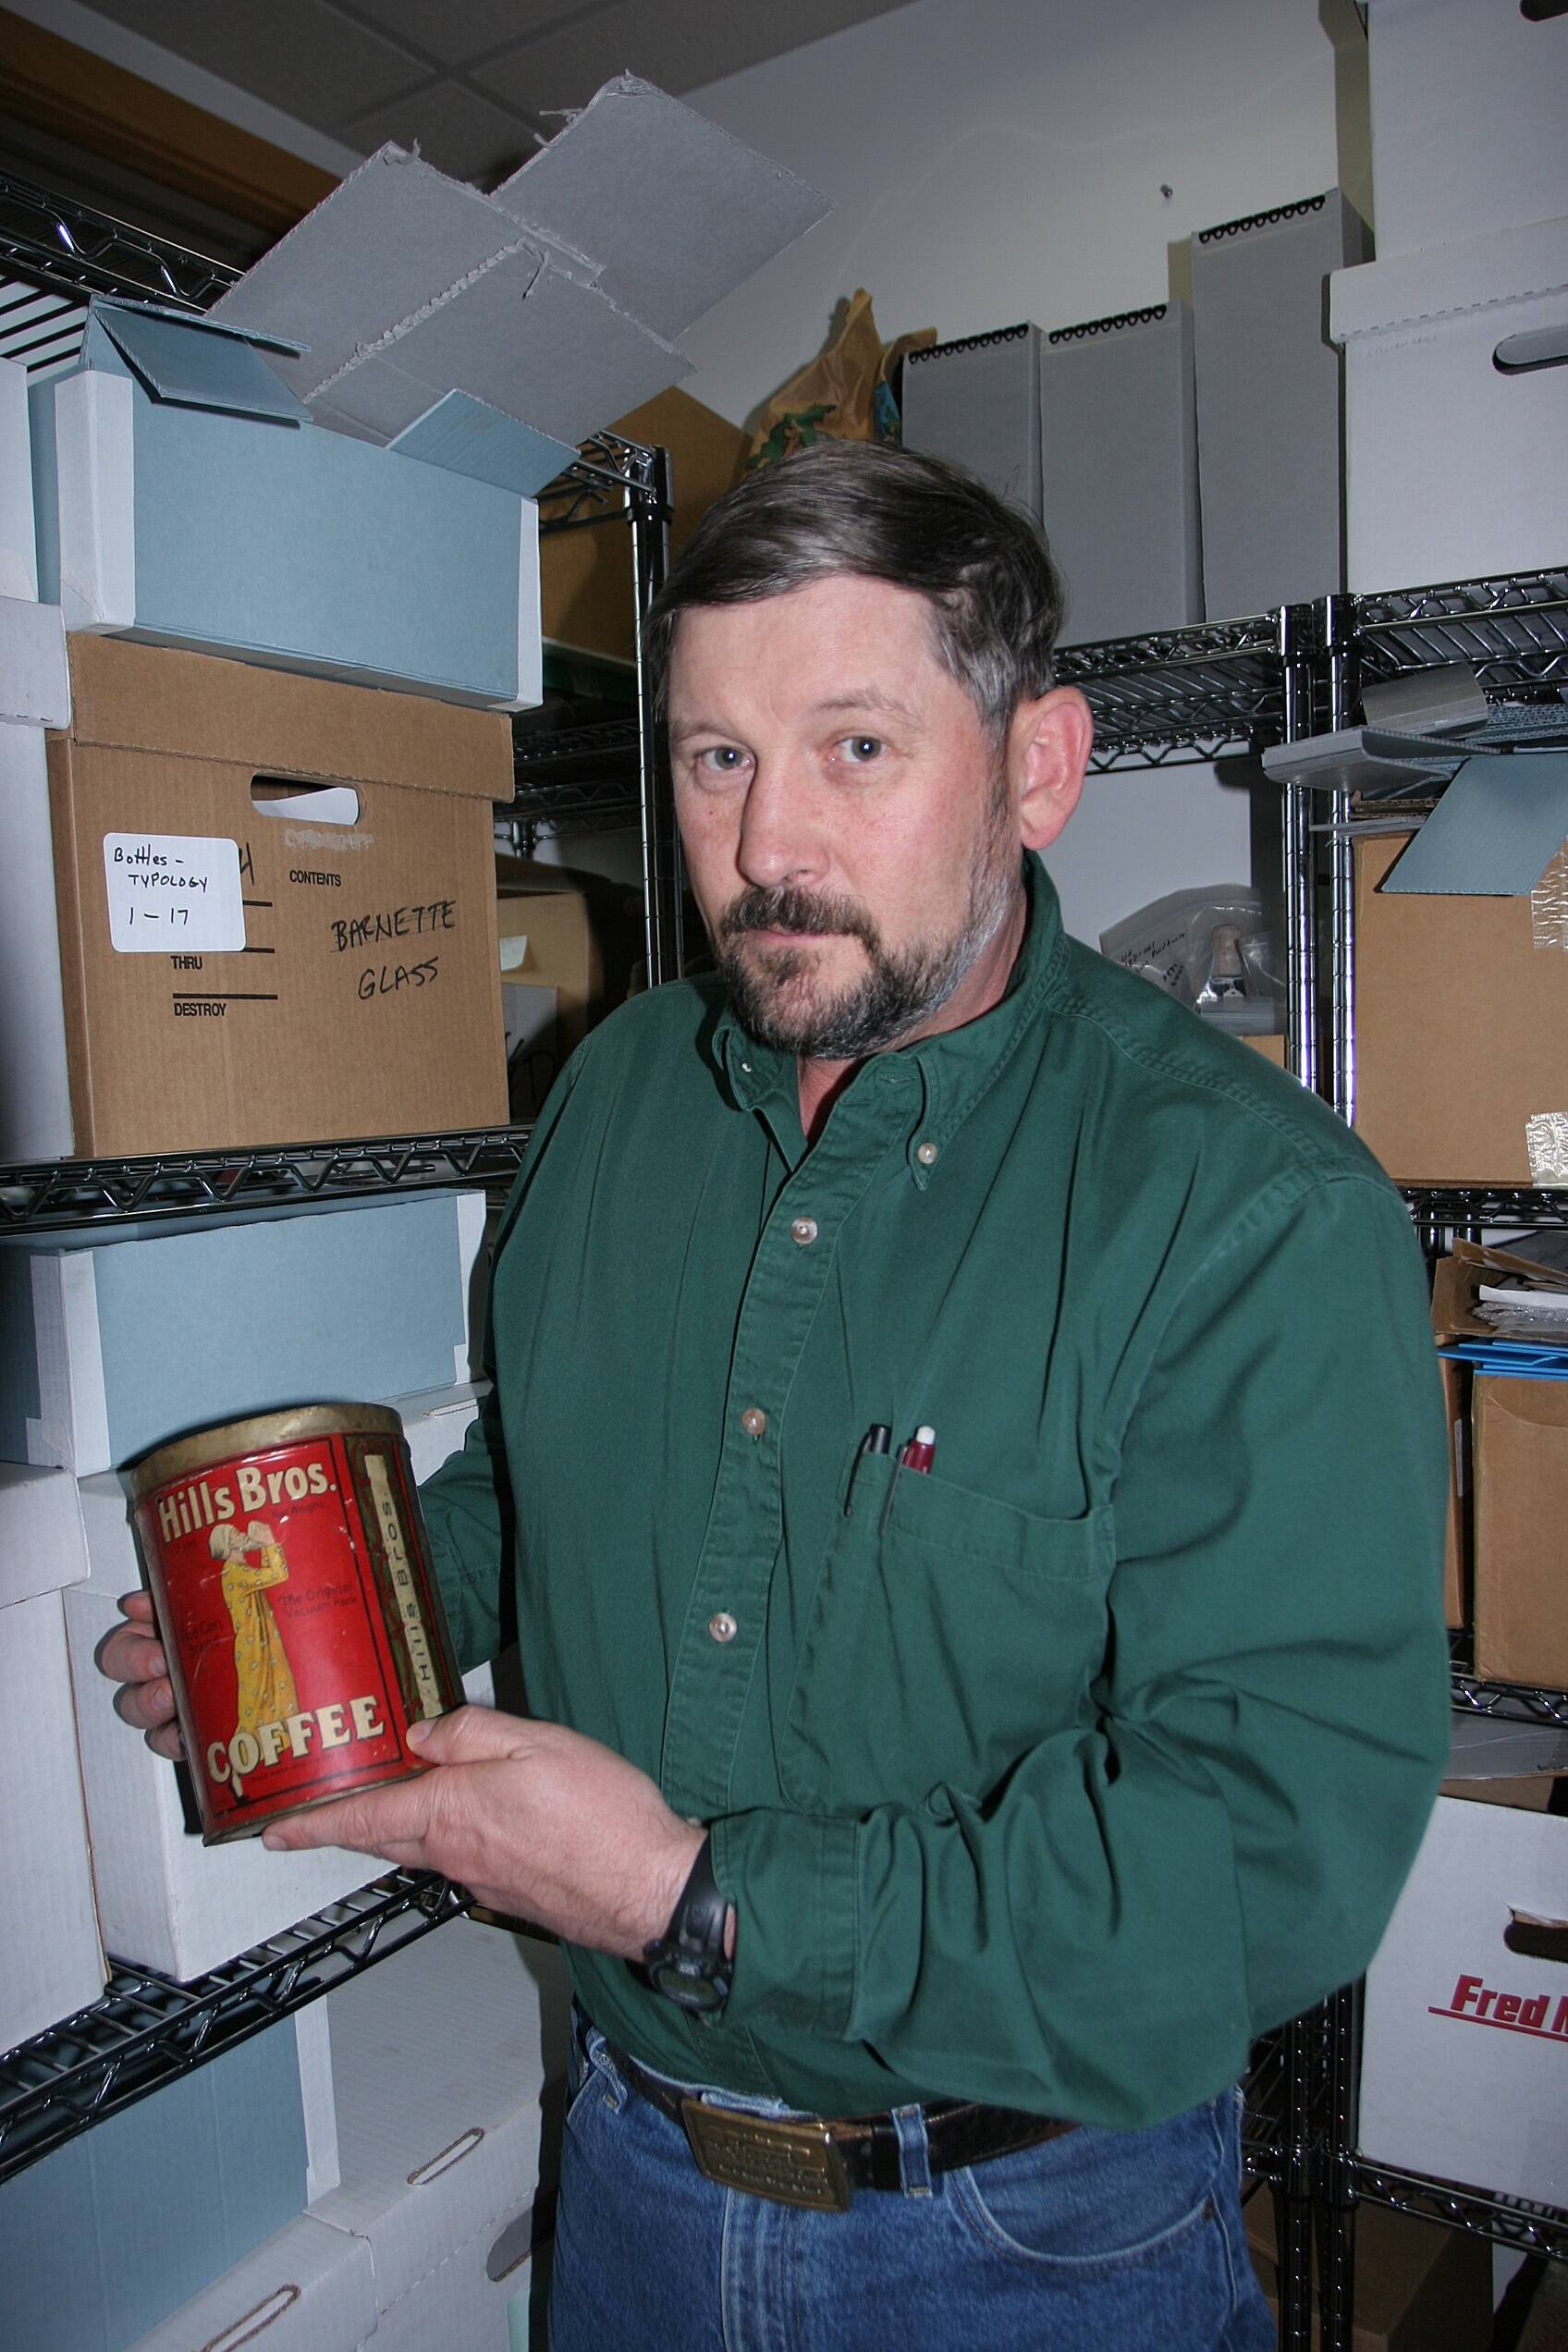 Steve Lanford holds a well-preserved Hills Brothers coffee can recovered from an historic site on public lands in Alaska. The company made numerous small changes to the label over the years, so archeologists utilizing a guide book can determine the age of cans they find. (Courtesy Photo / Craig McCaa,BLM.